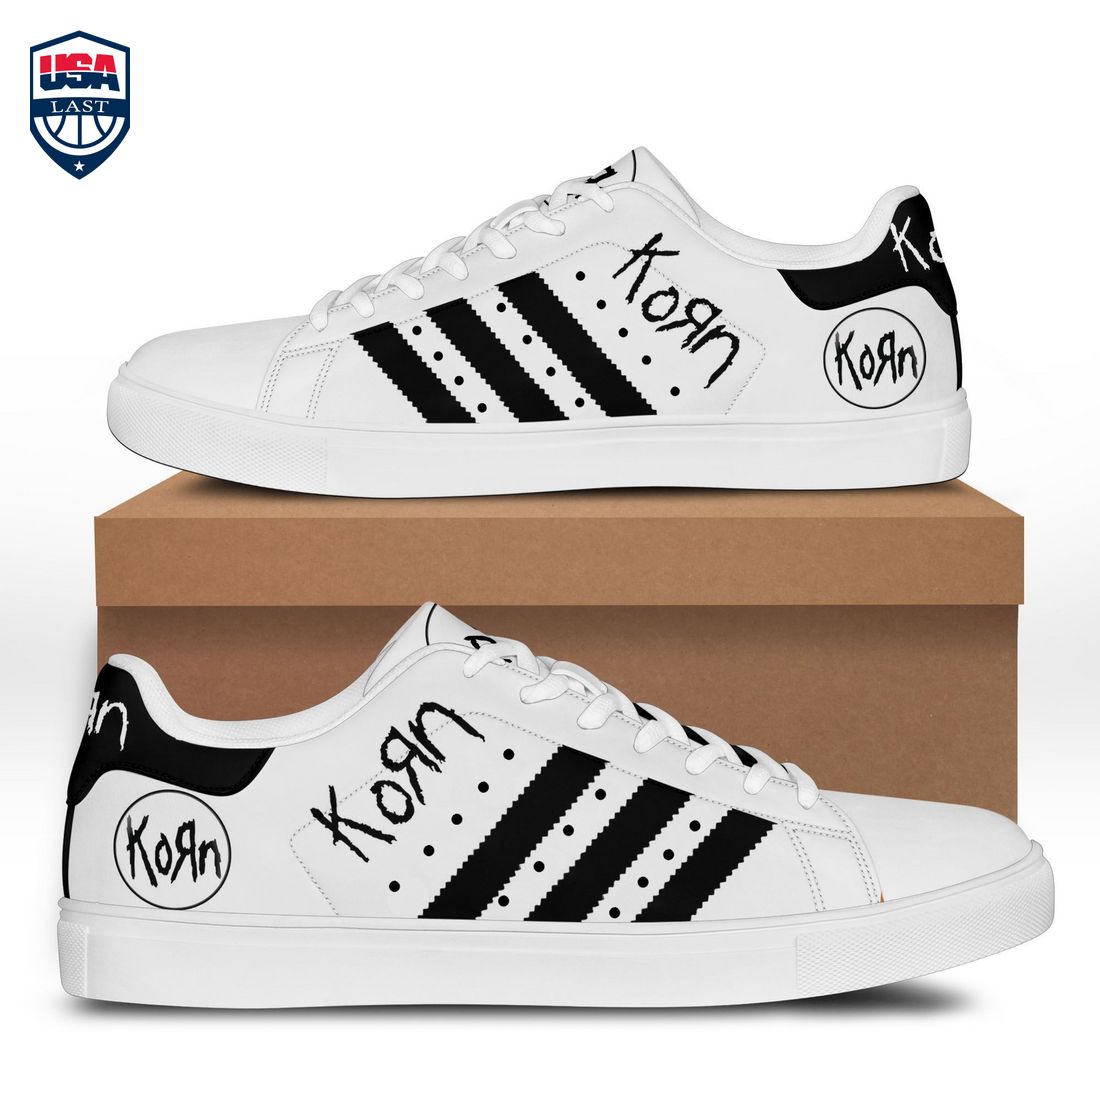 Korn Black Stripes Style 1 Stan Smith Low Top Shoes - Loving, dare I say?